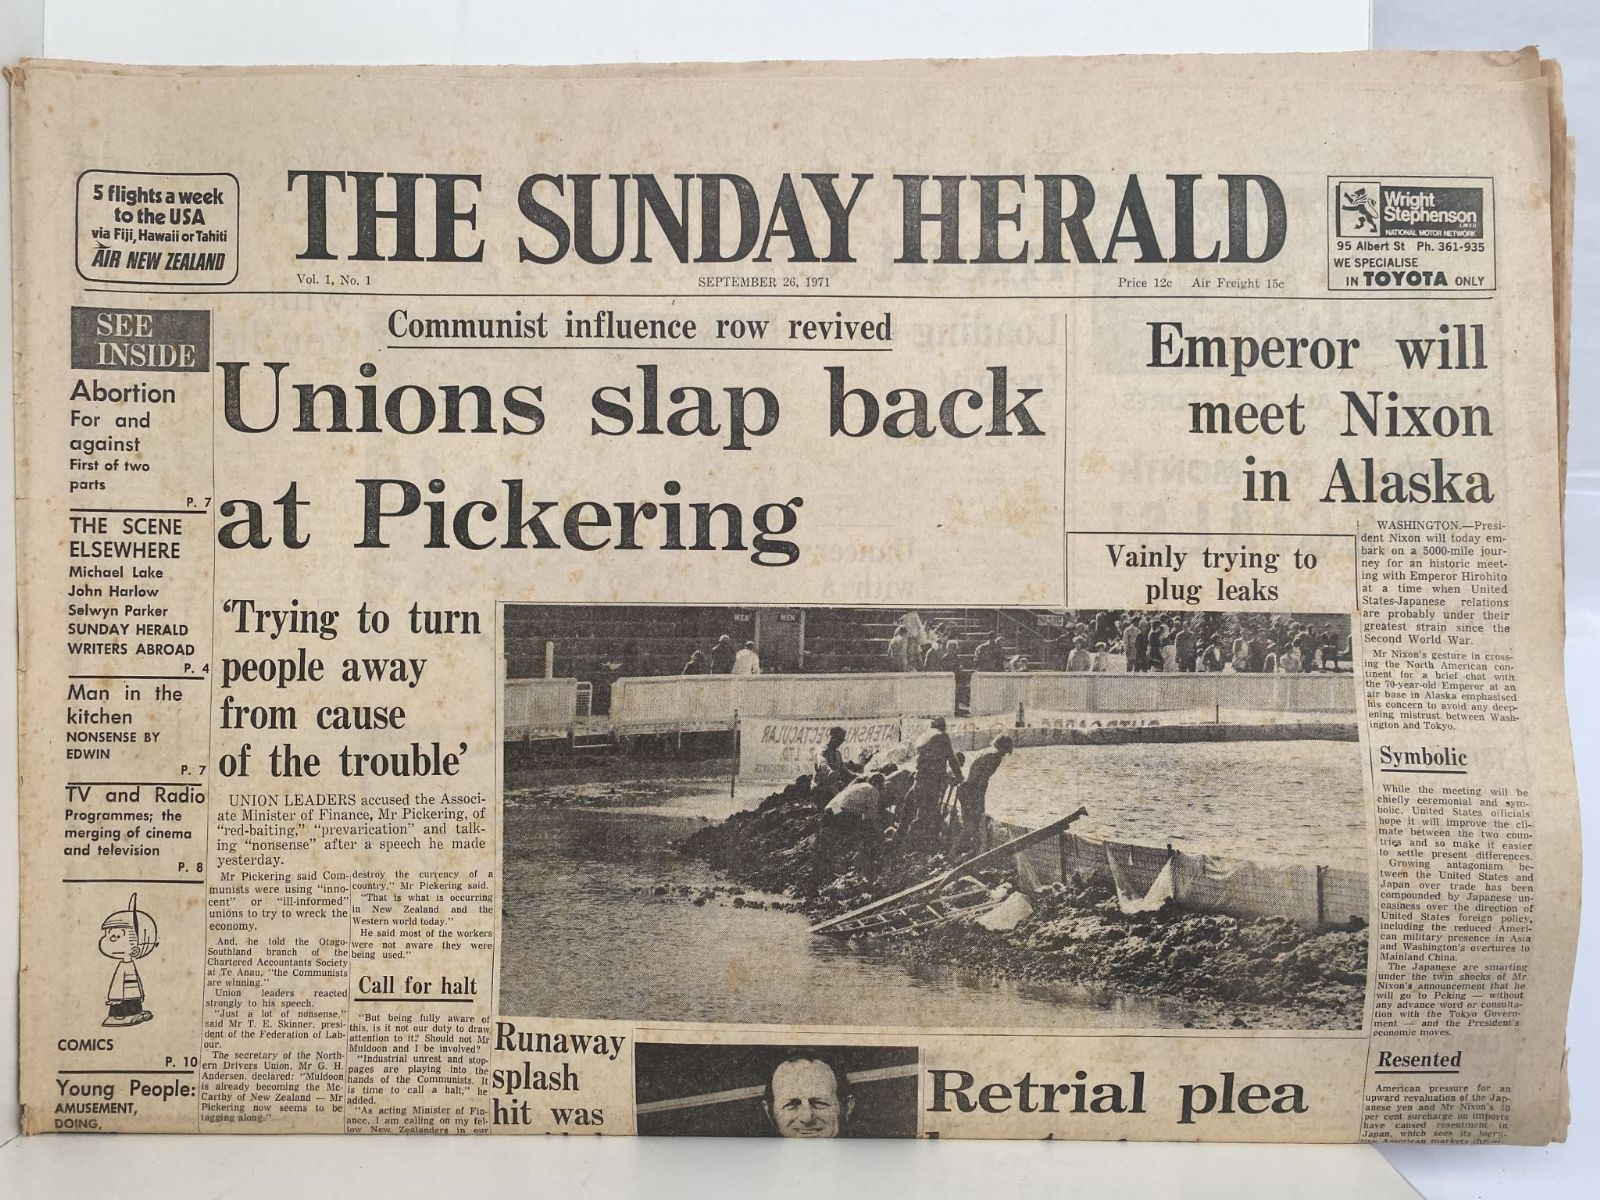 OLD NEWSPAPER: The Sunday Herald, Vol 1. No 1. 26 Sept 1971 - very first edition